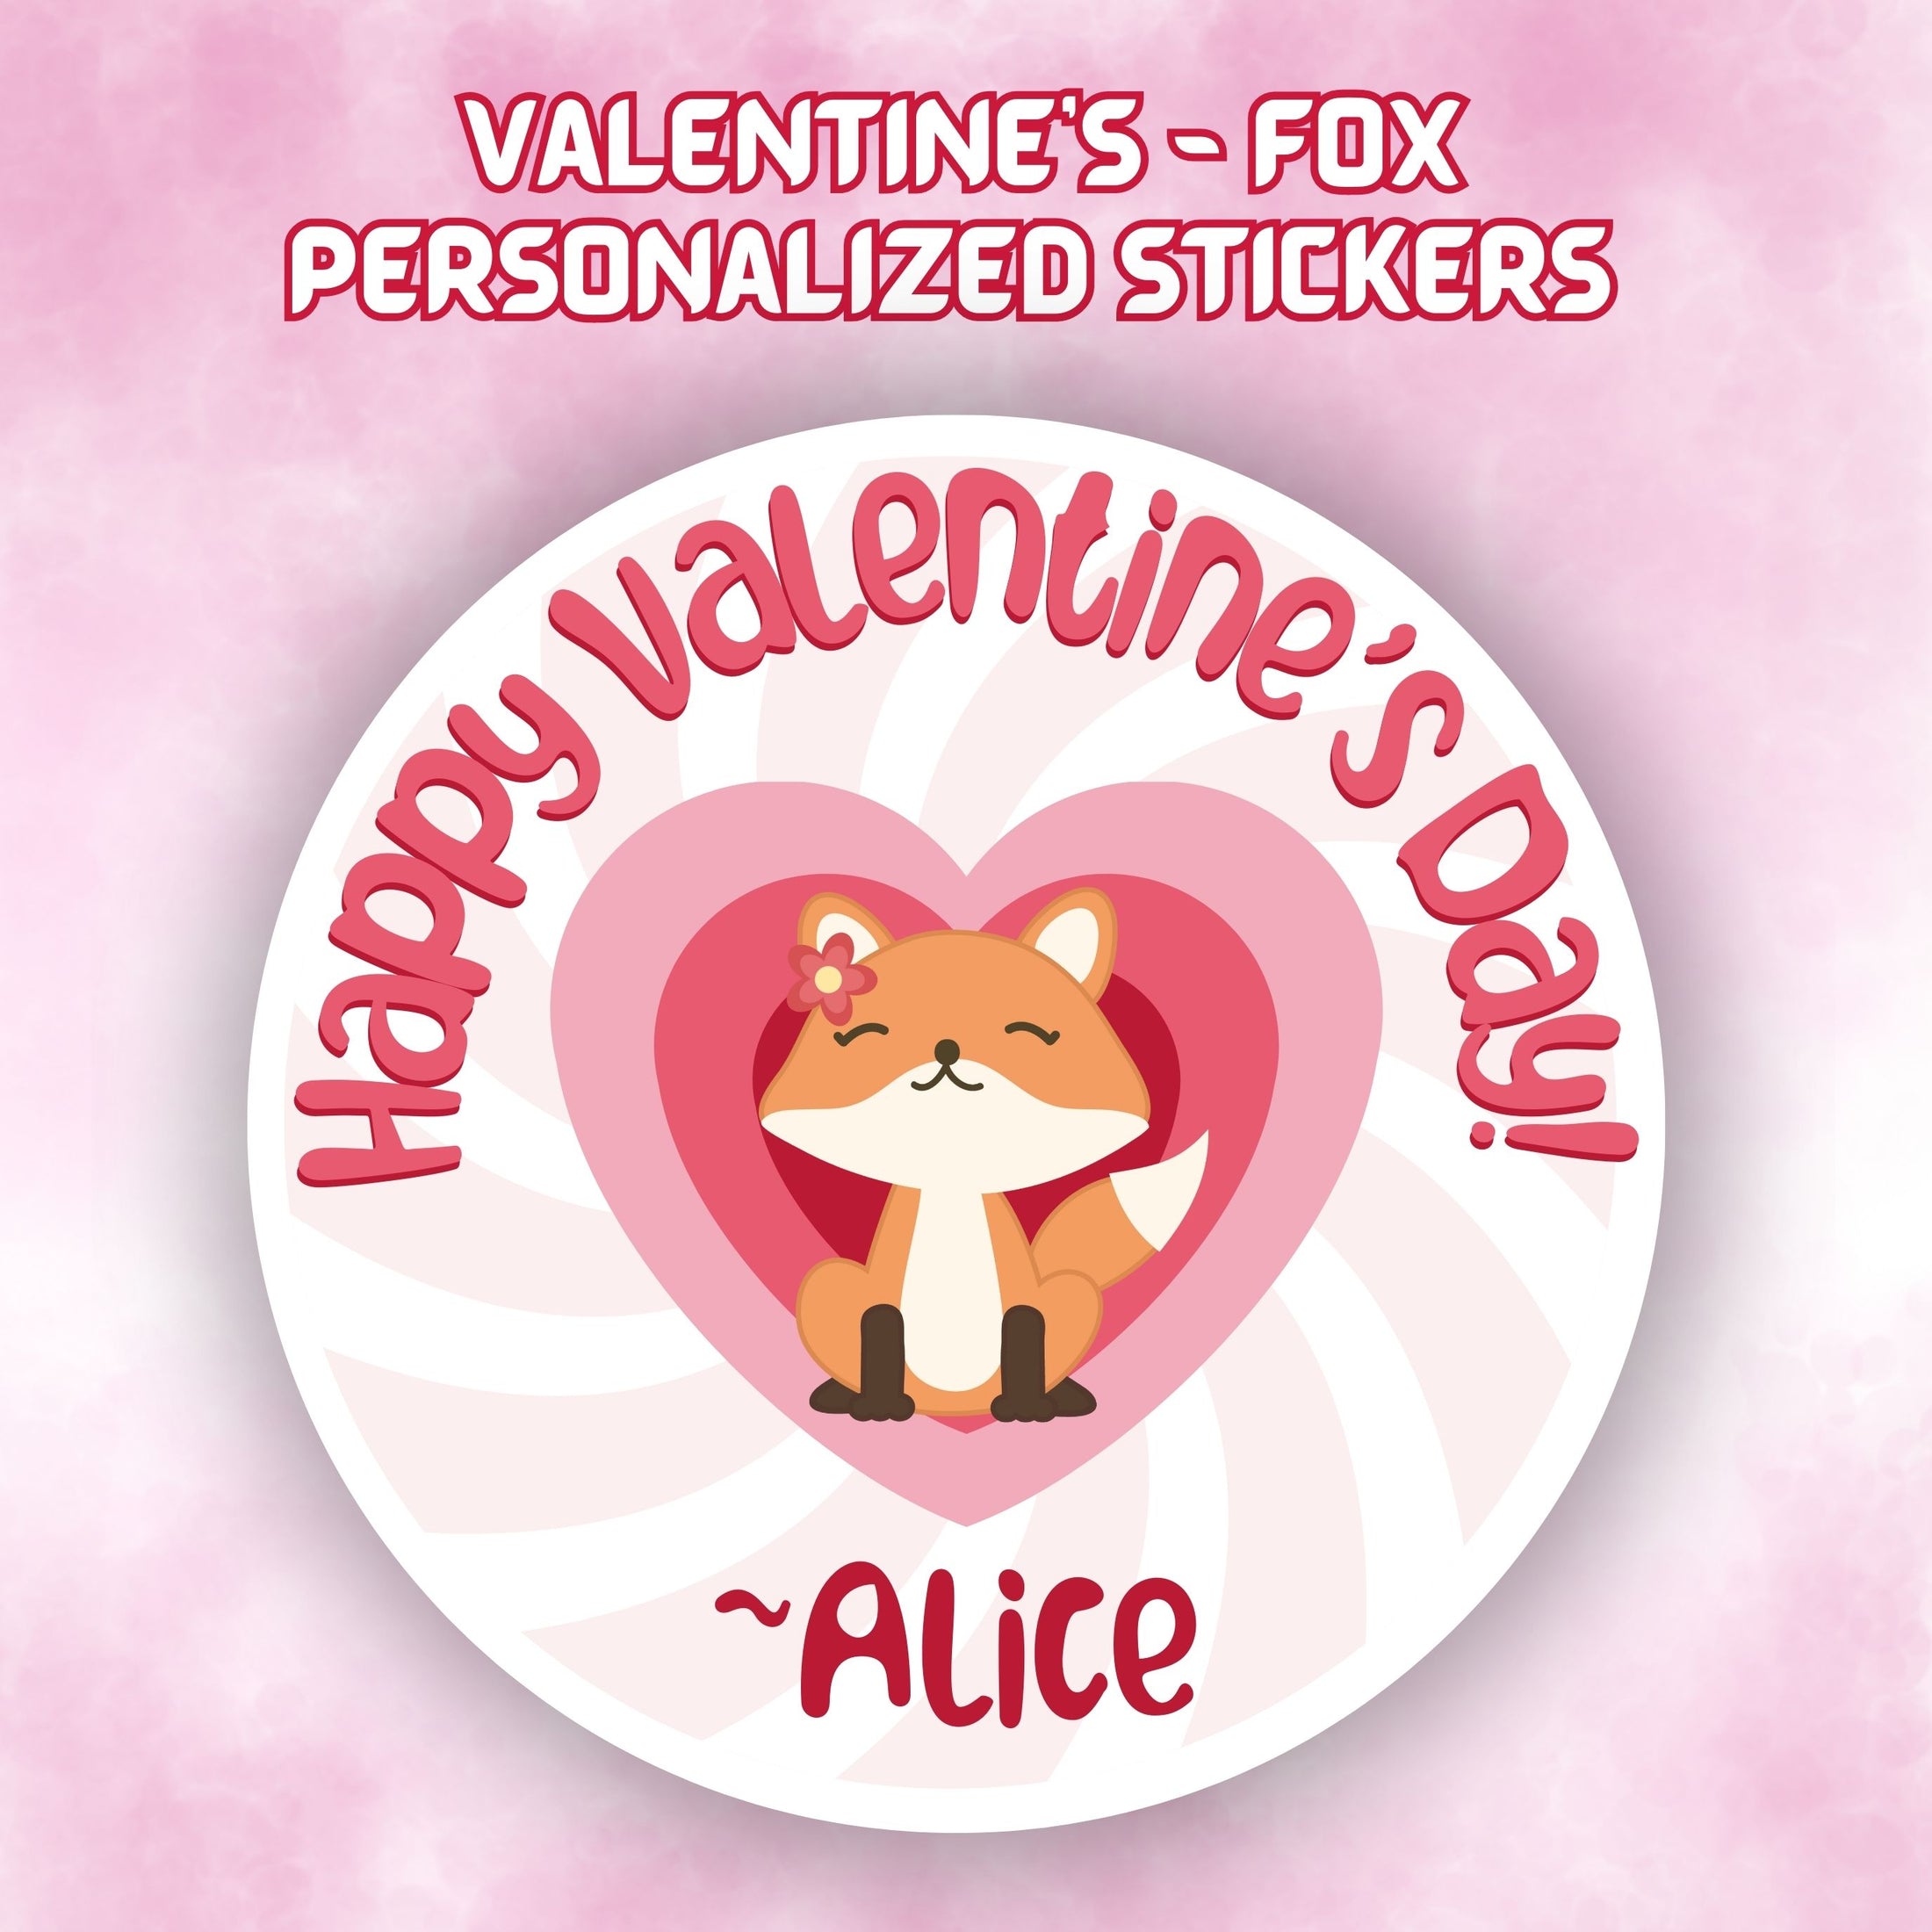 This cover page shows the personalized valentine sticker on a pink cloudy background.